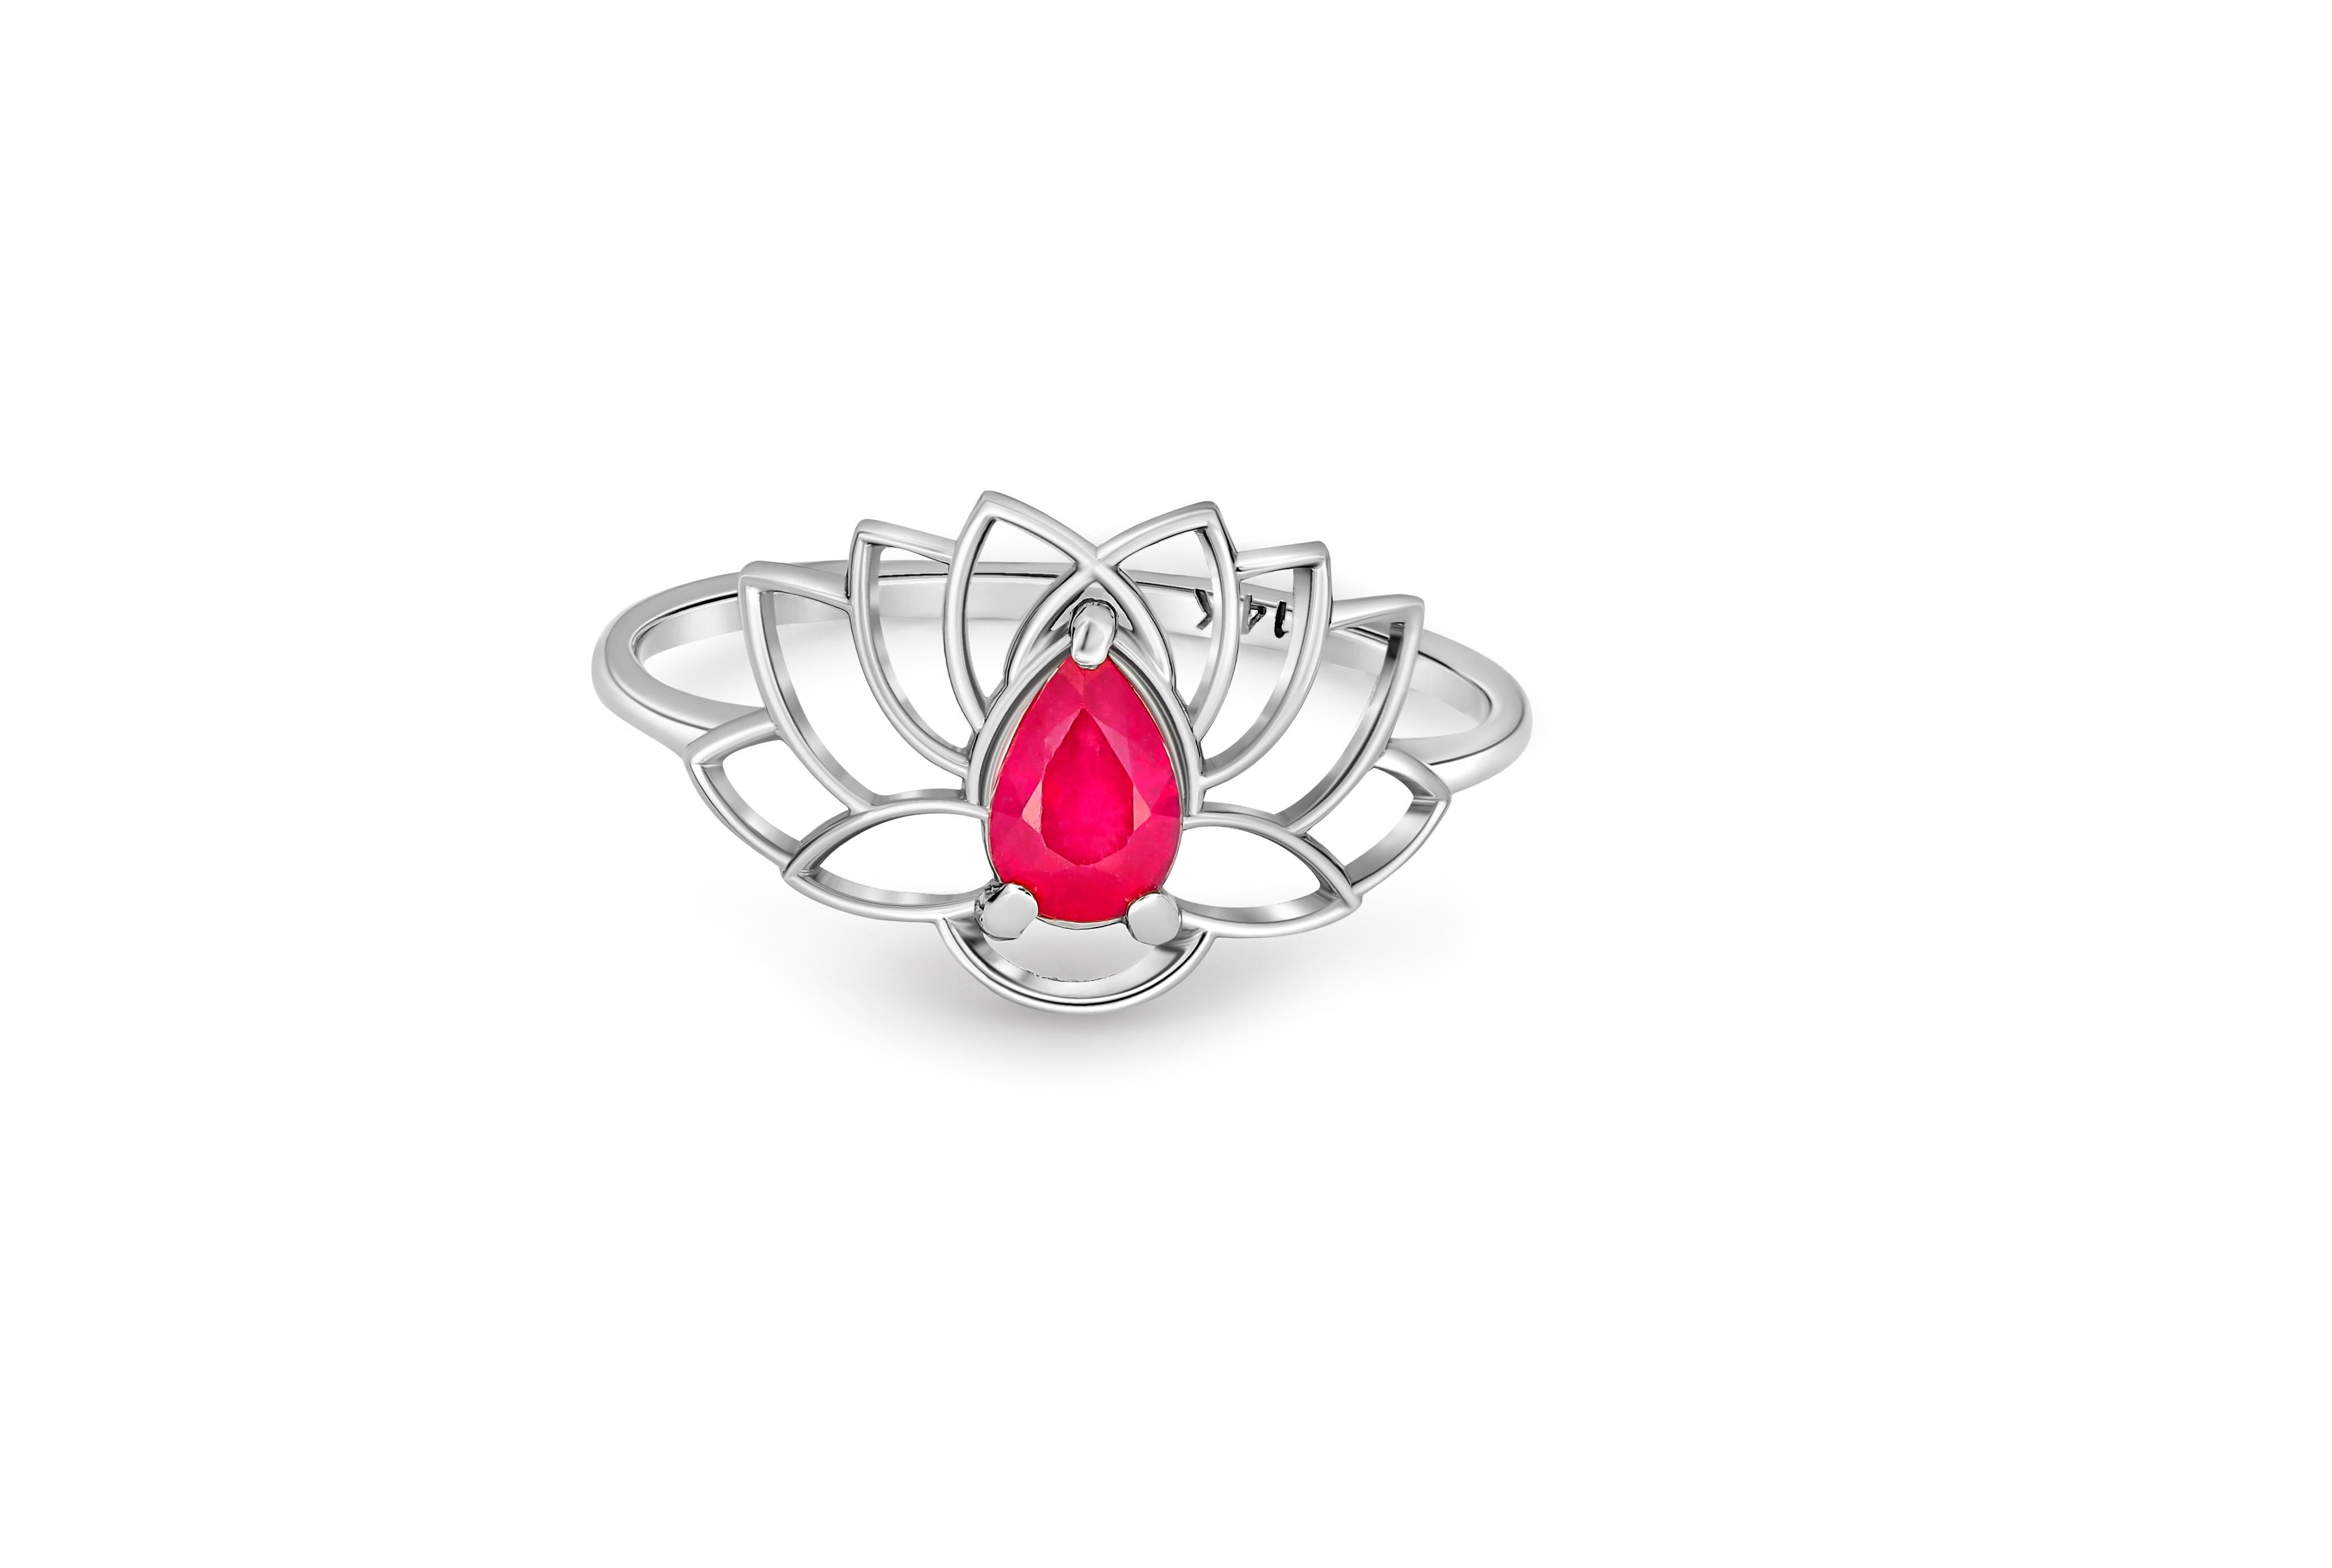 Lily ring with ruby in 14k gold. 
Genuine pear Ruby ring. Pear ruby ring. Water lily gemstone ring. July bithstone ring. Flower ruby ring.

Metal: 14k gold
Weight: 1.75 g. depends from size.

Ruby: color - pinkish red
Pear cut, 0.55 ct.